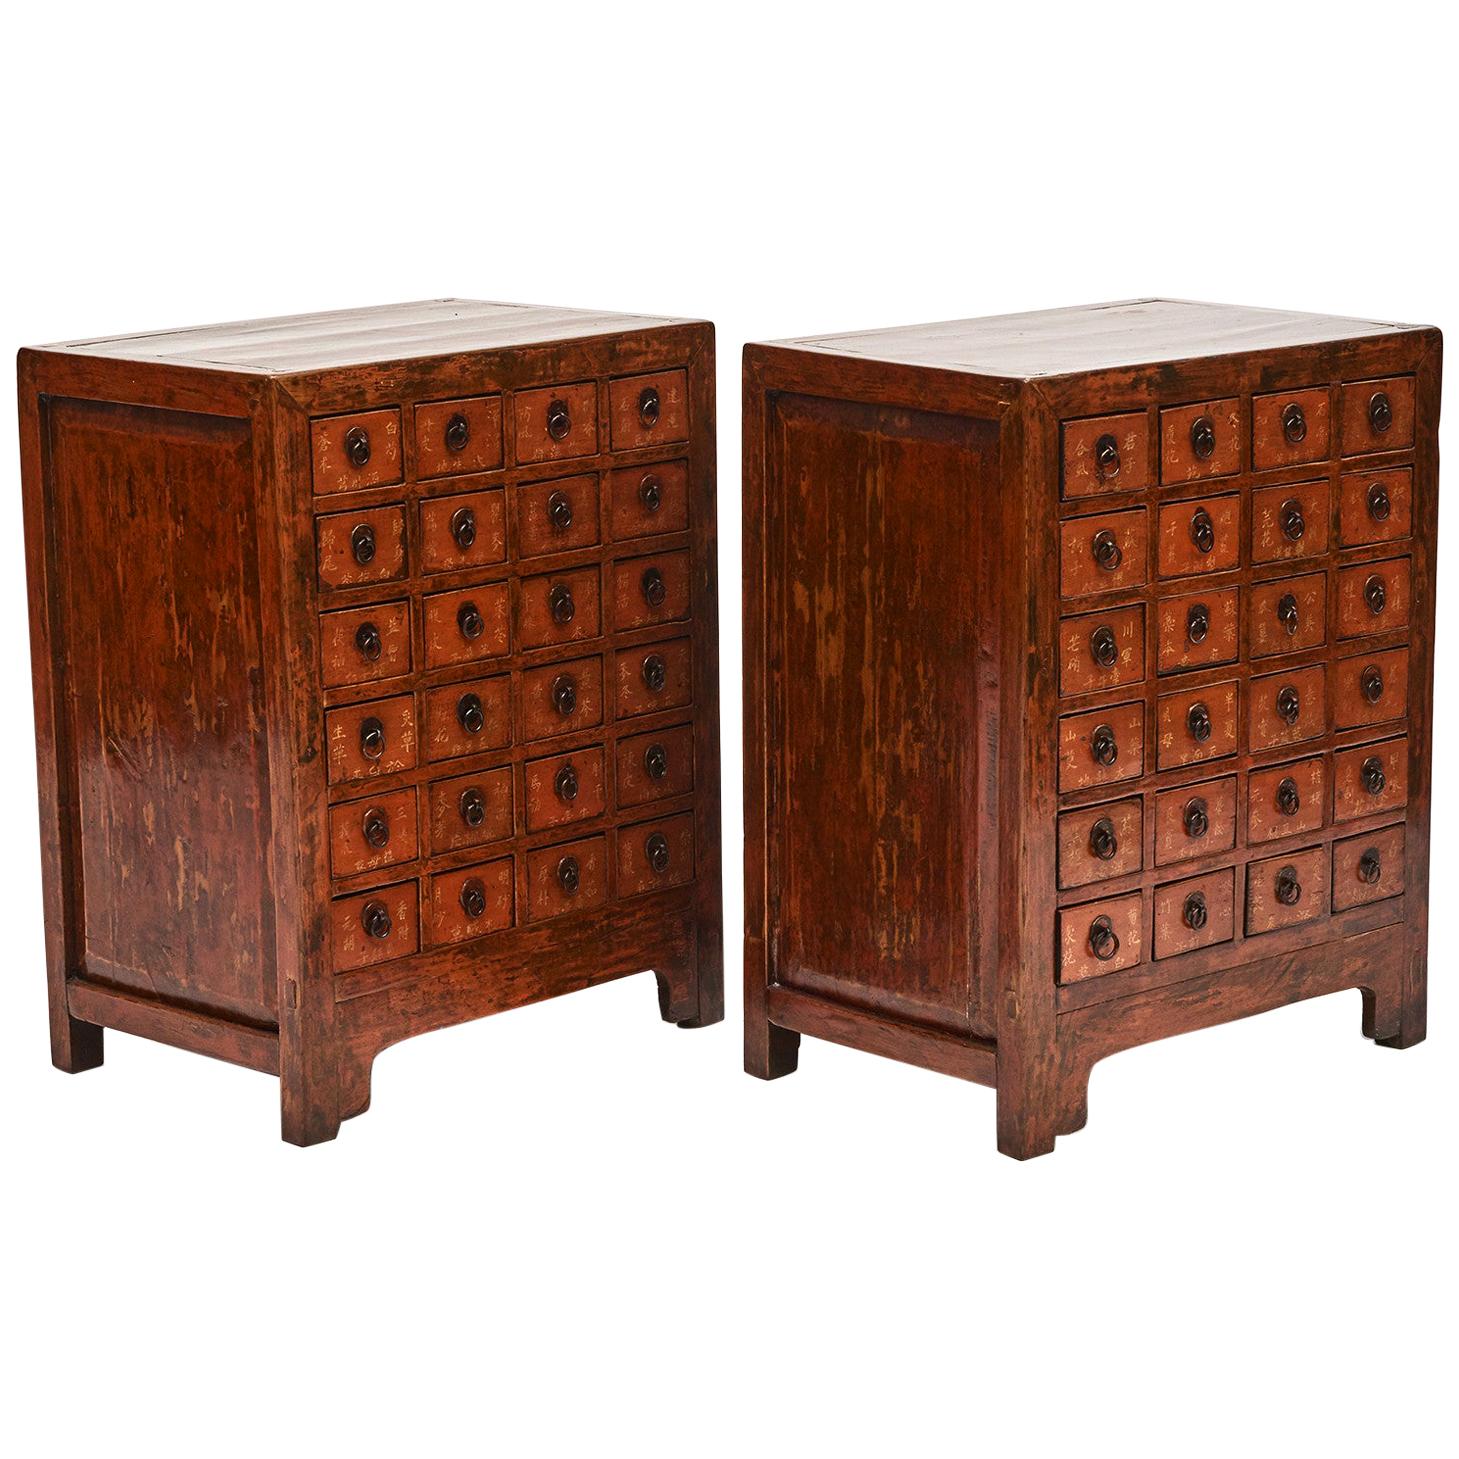 Pair of Chinese Apothecary 'Pharmacy' Medicine Chest